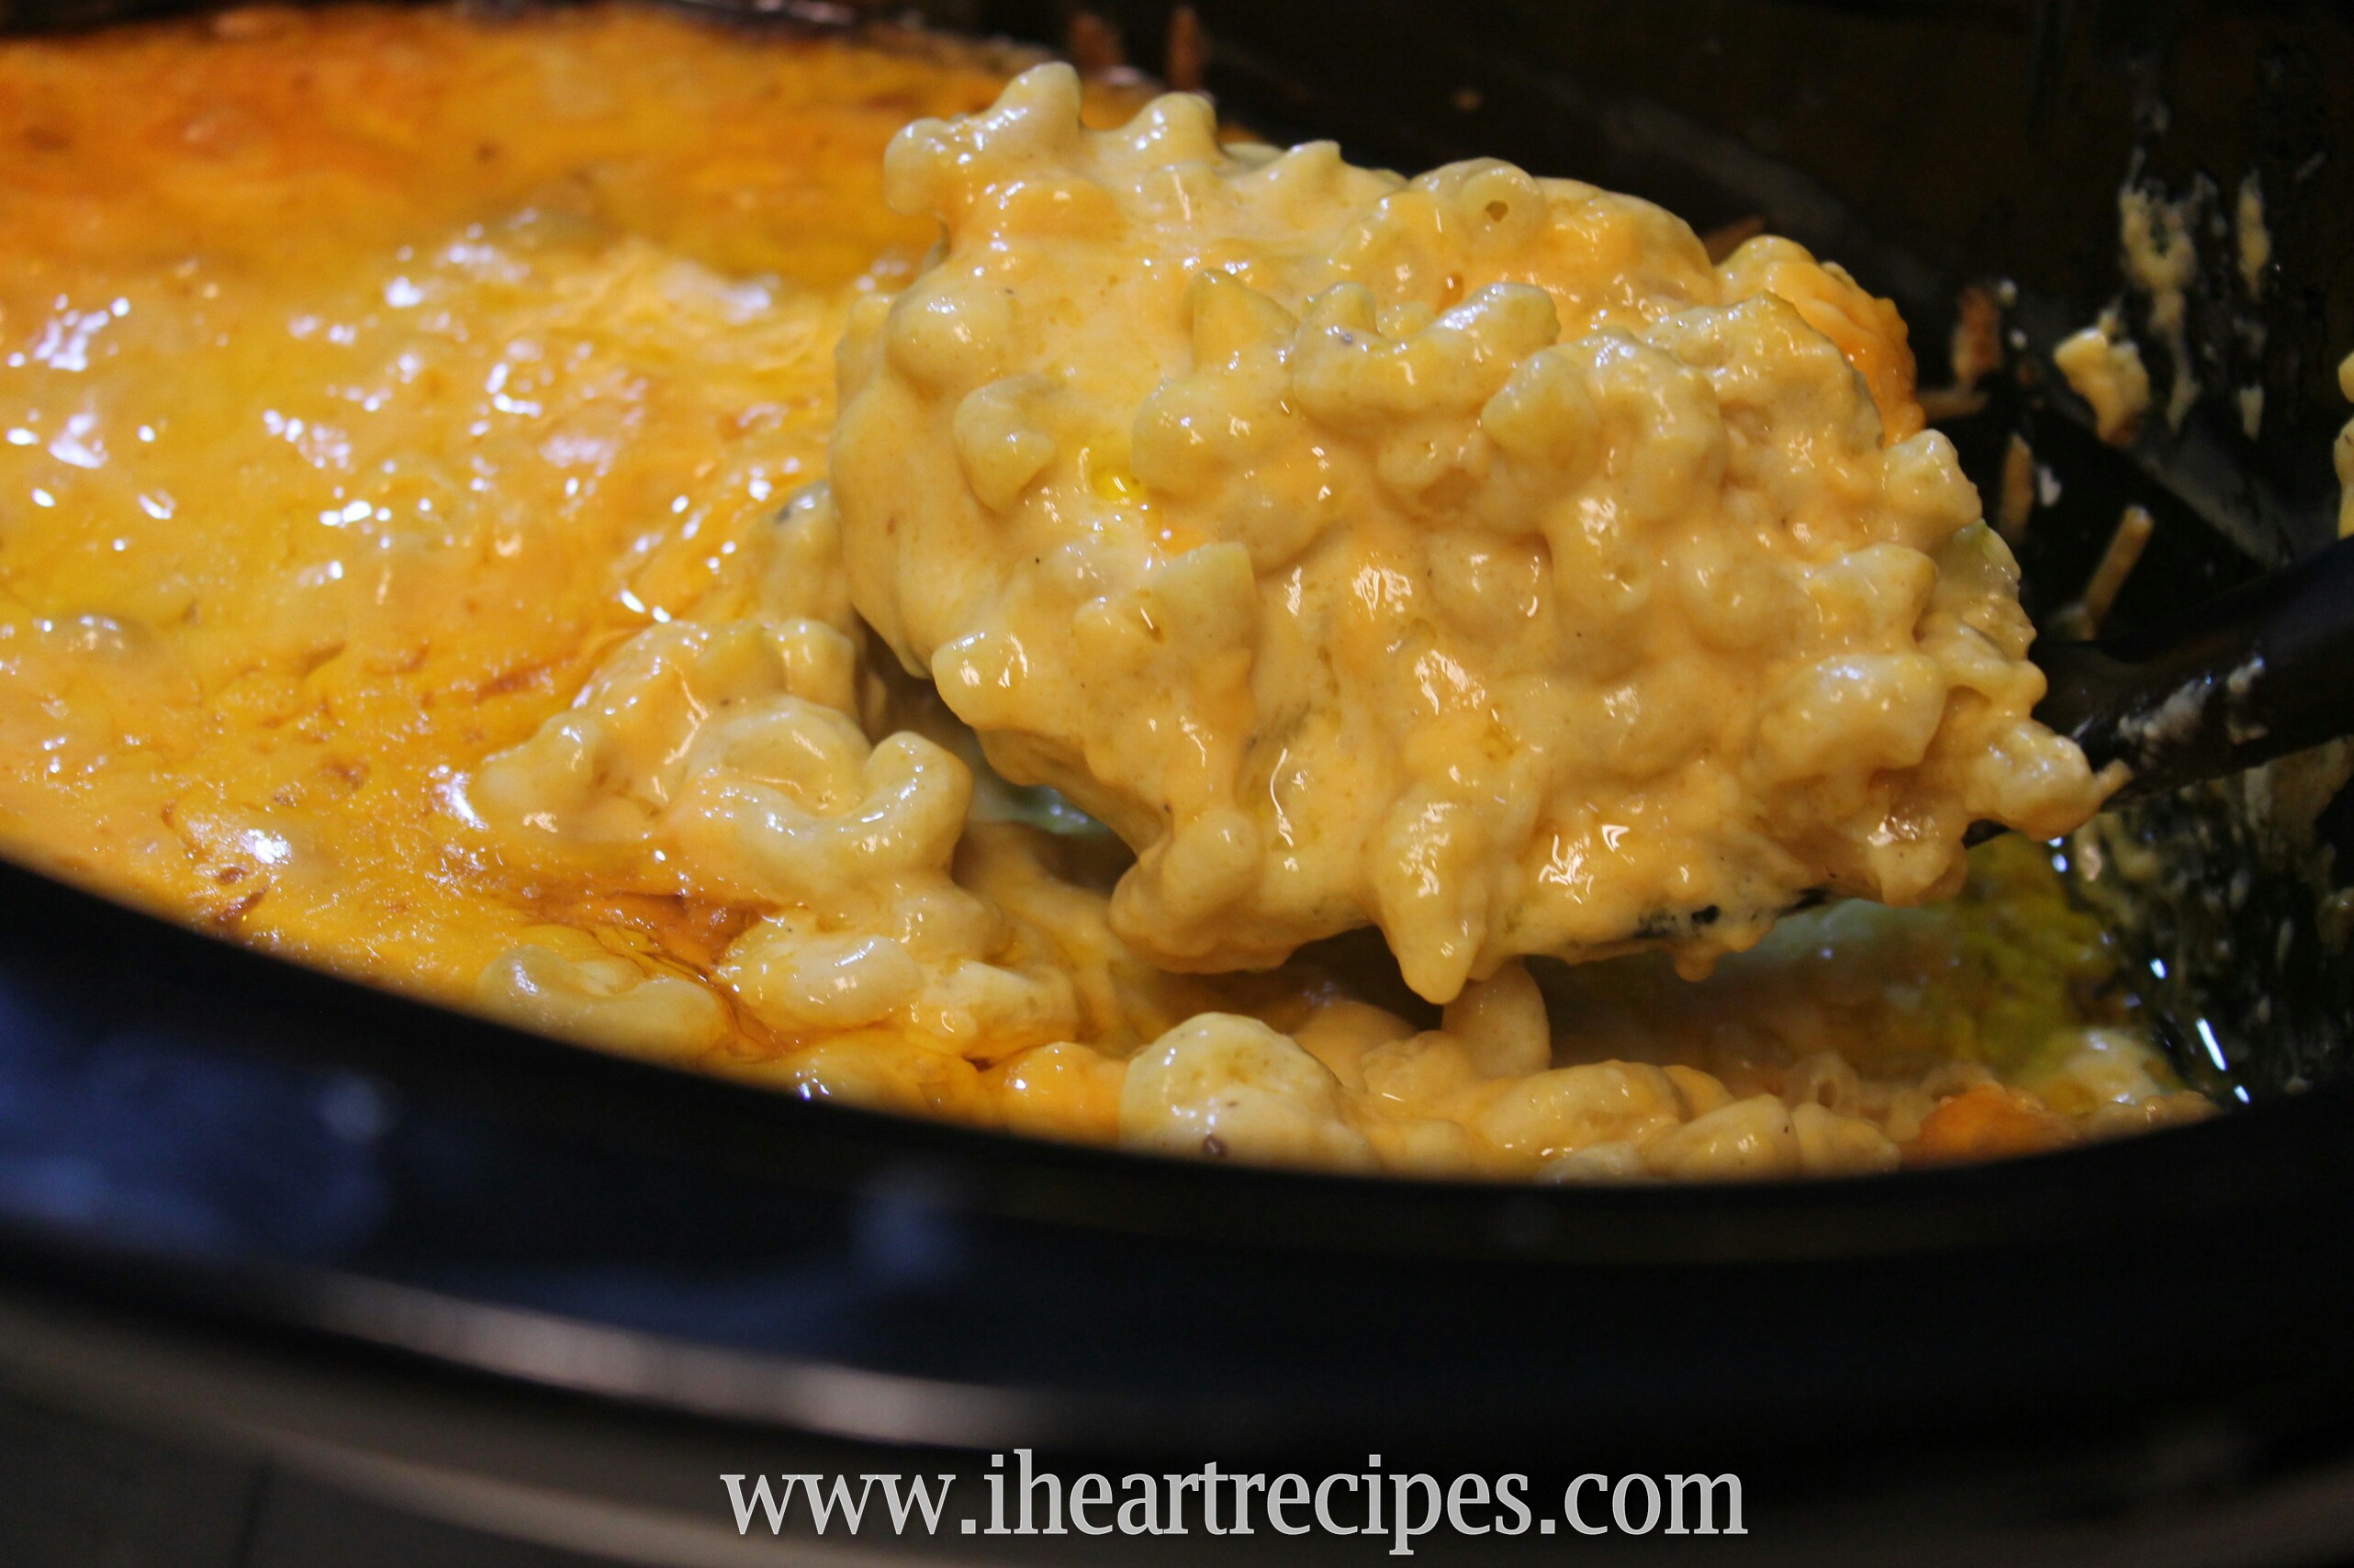 The best baked macaroni and cheese recipe